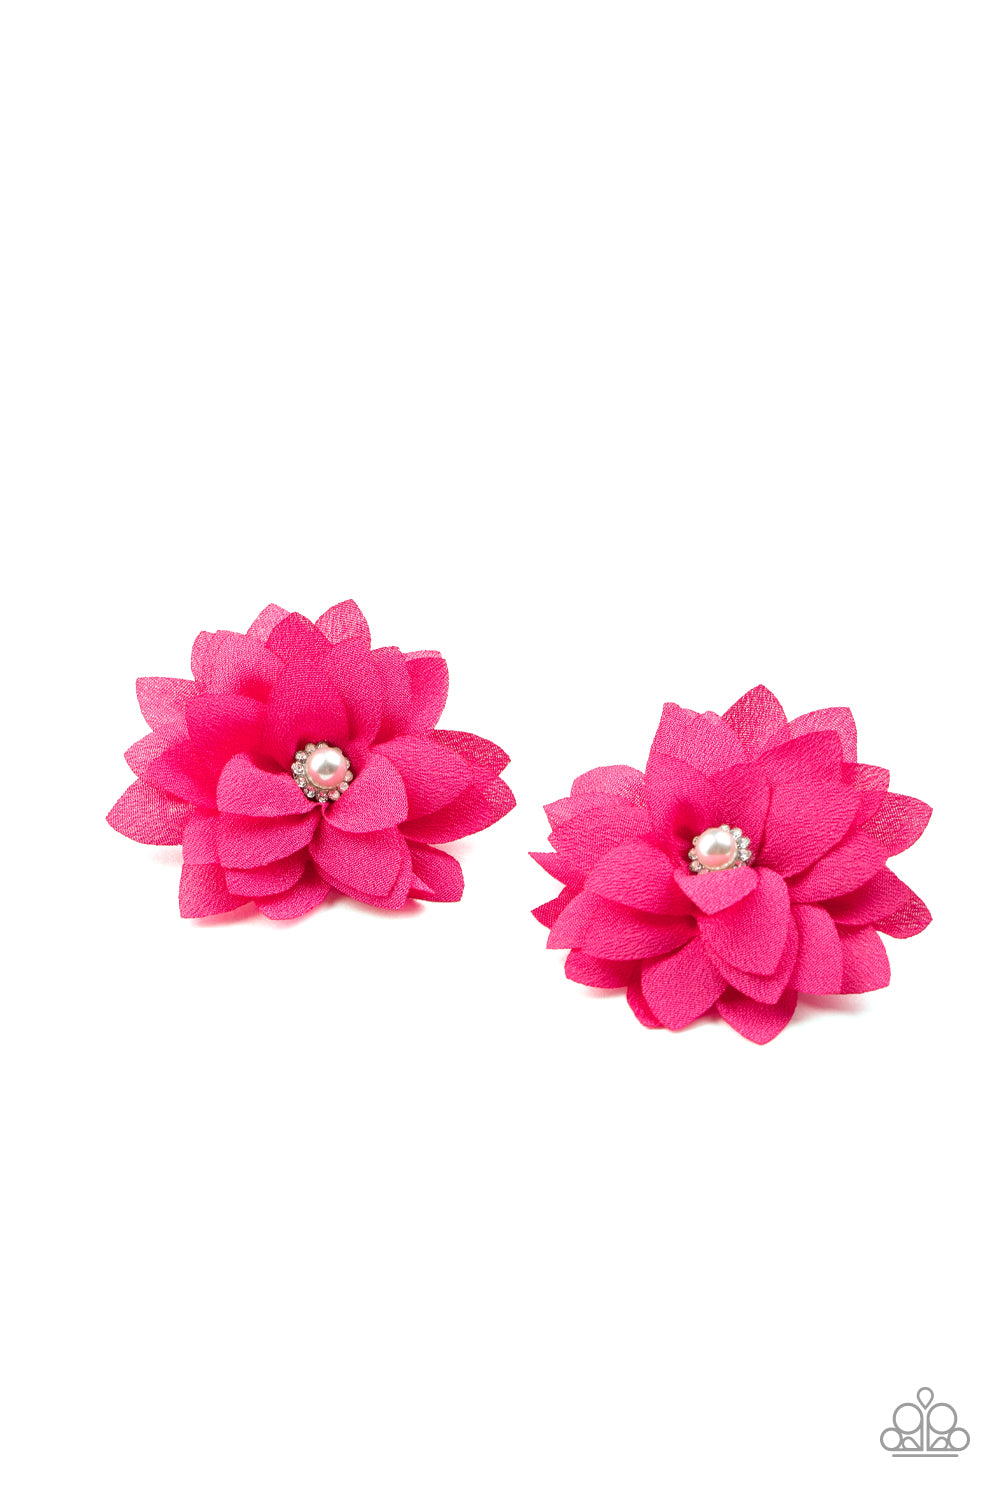 Things That Go BLOOM - pink - Paparazzi hair clip